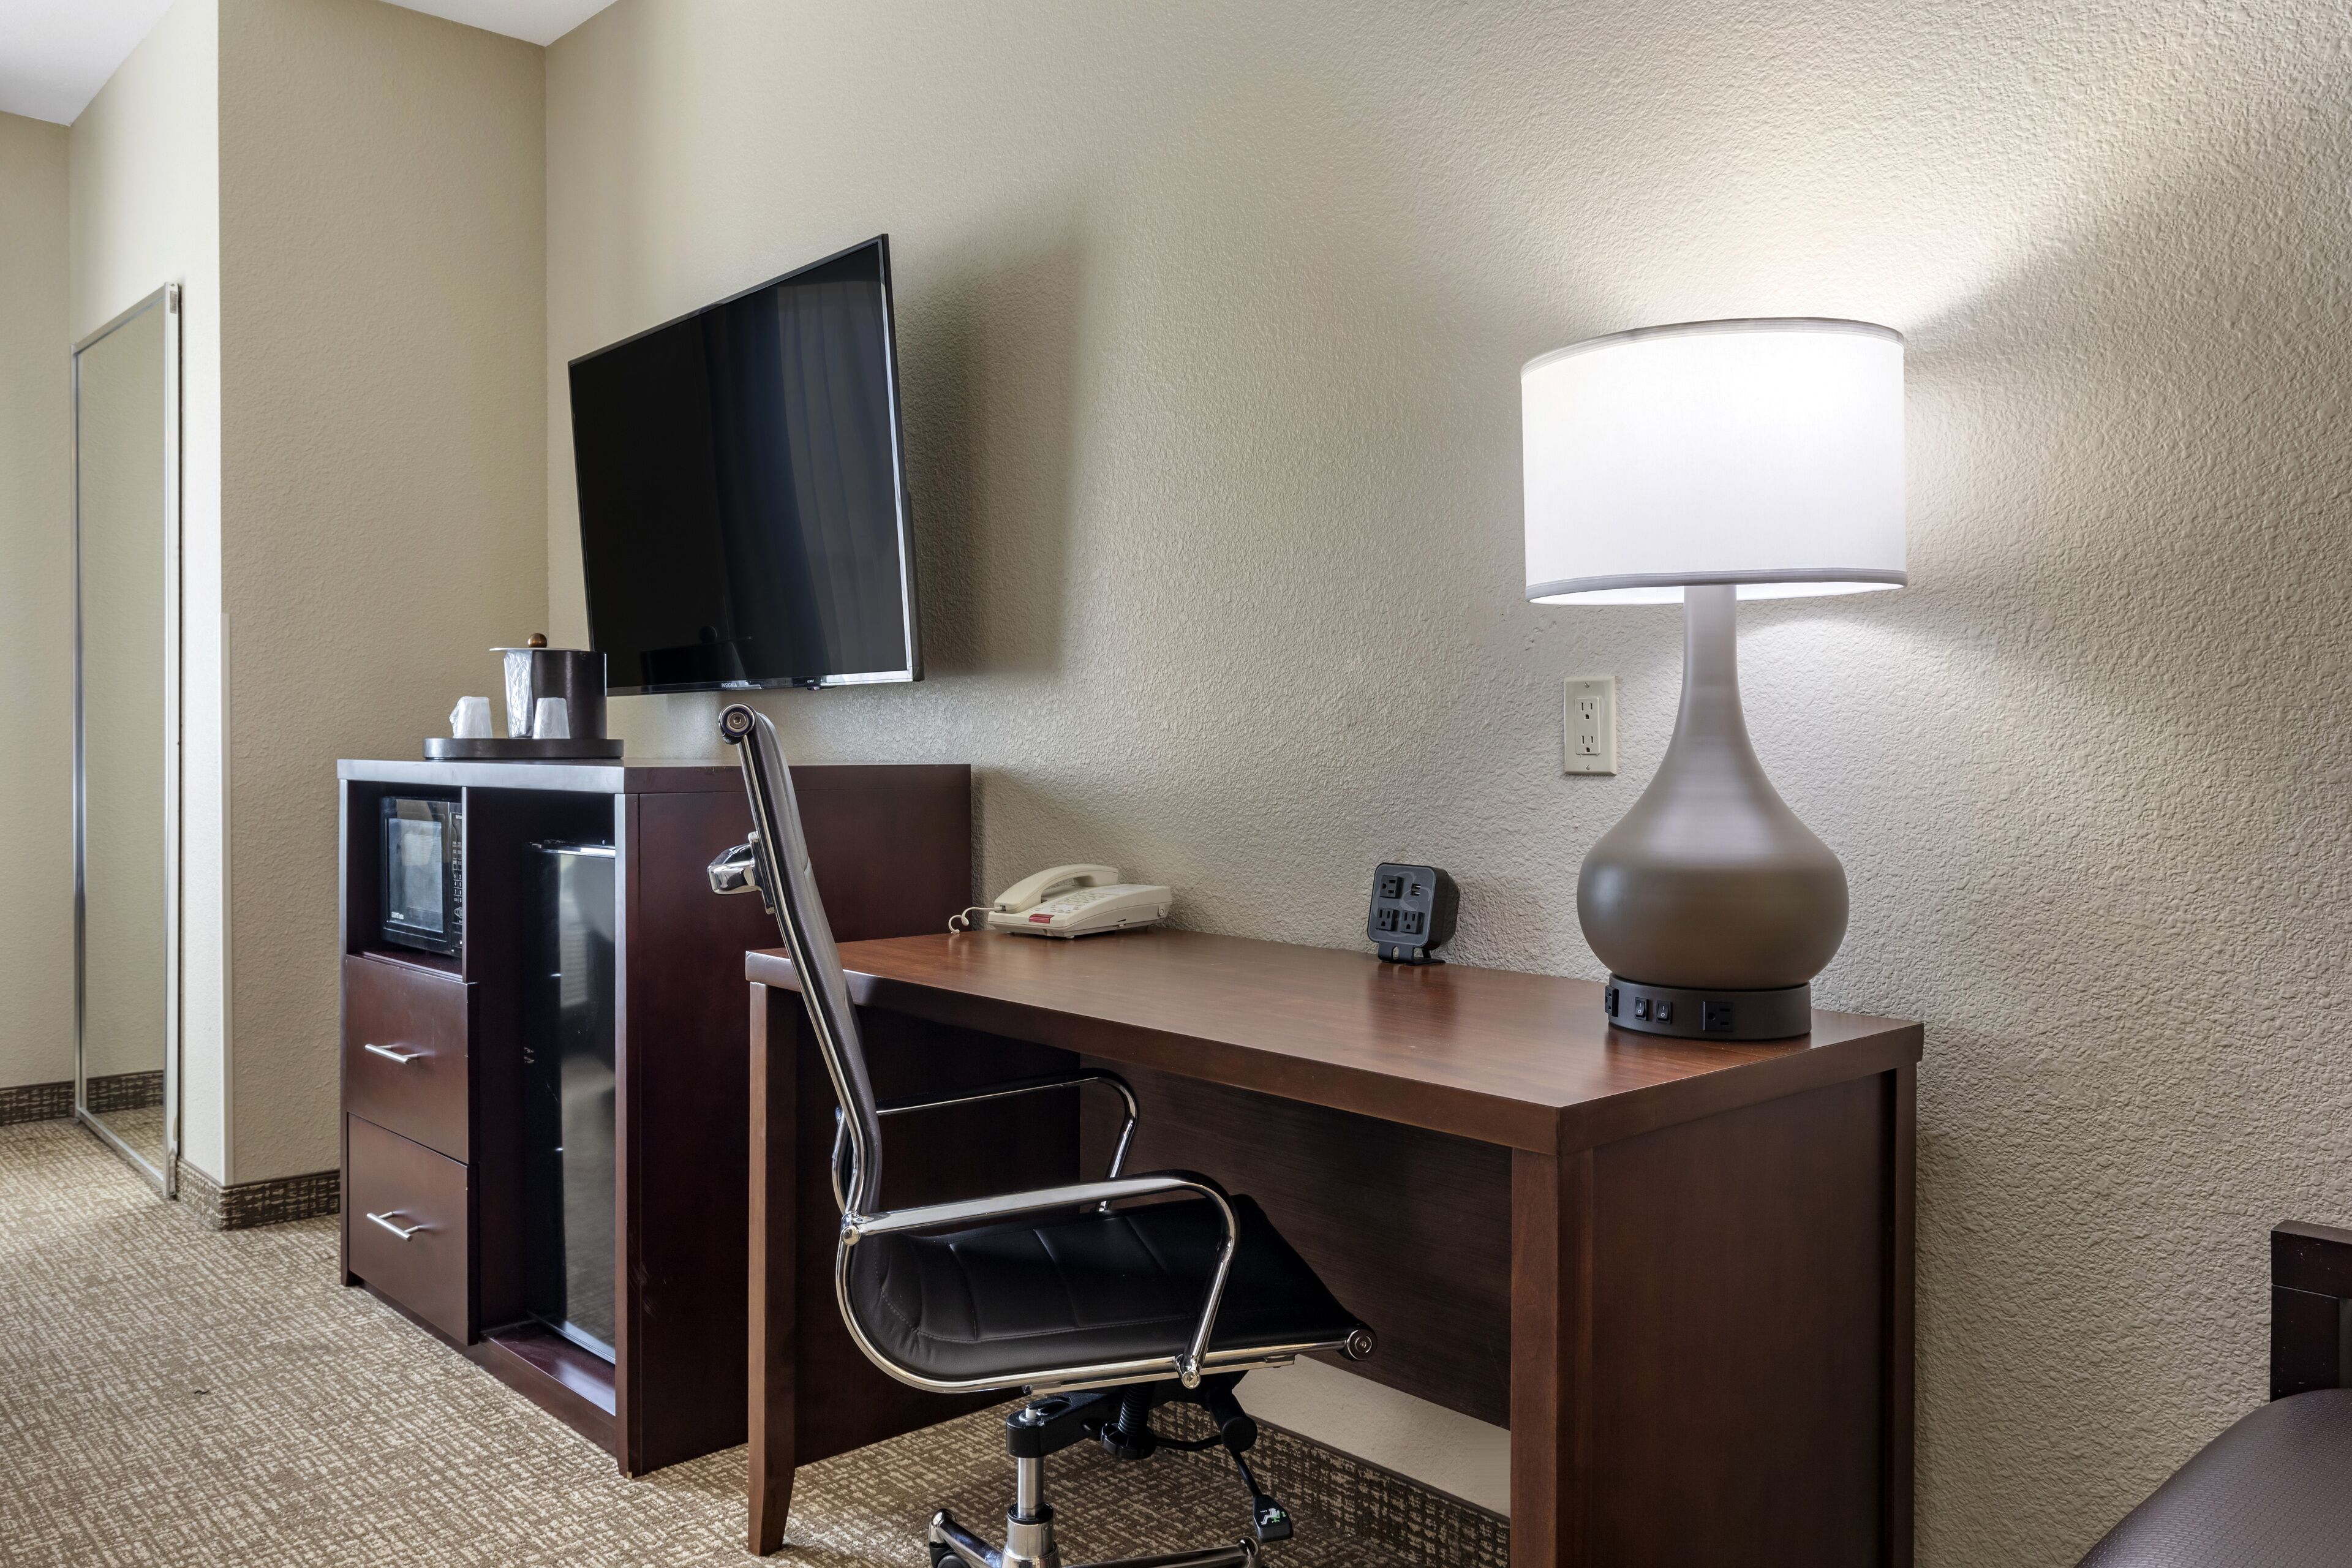 Country Inn & Suites by Radisson, West Valley City, UT